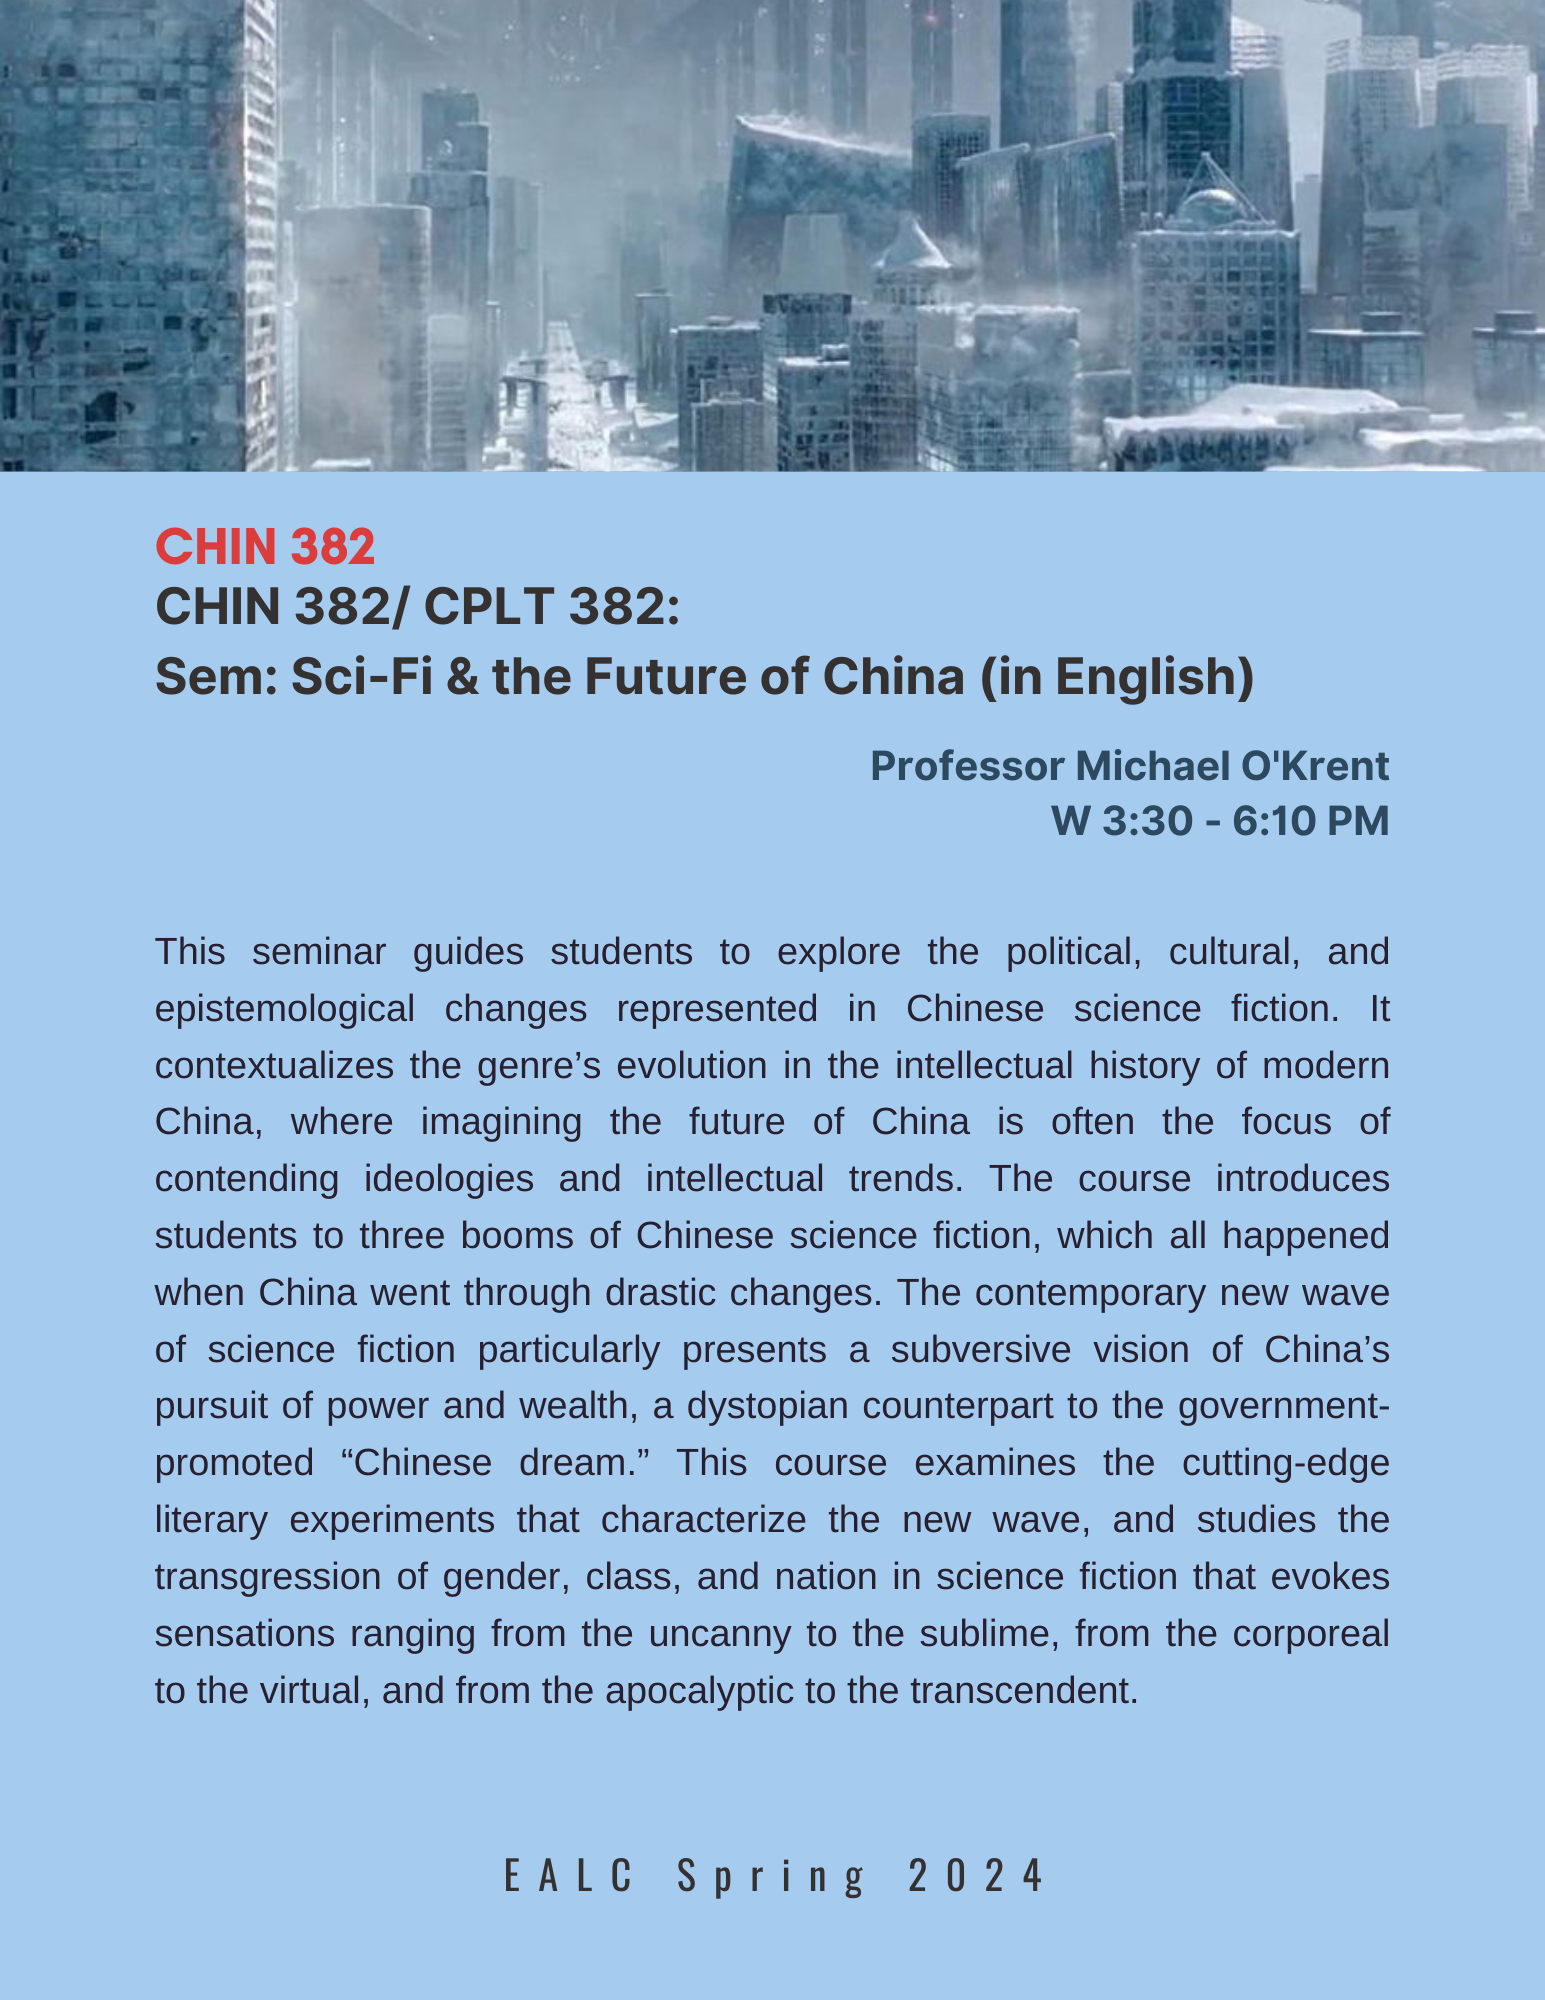 CPLT 382 / CHIN 382: Sem: Sci-Fi & The Future of China (in English)